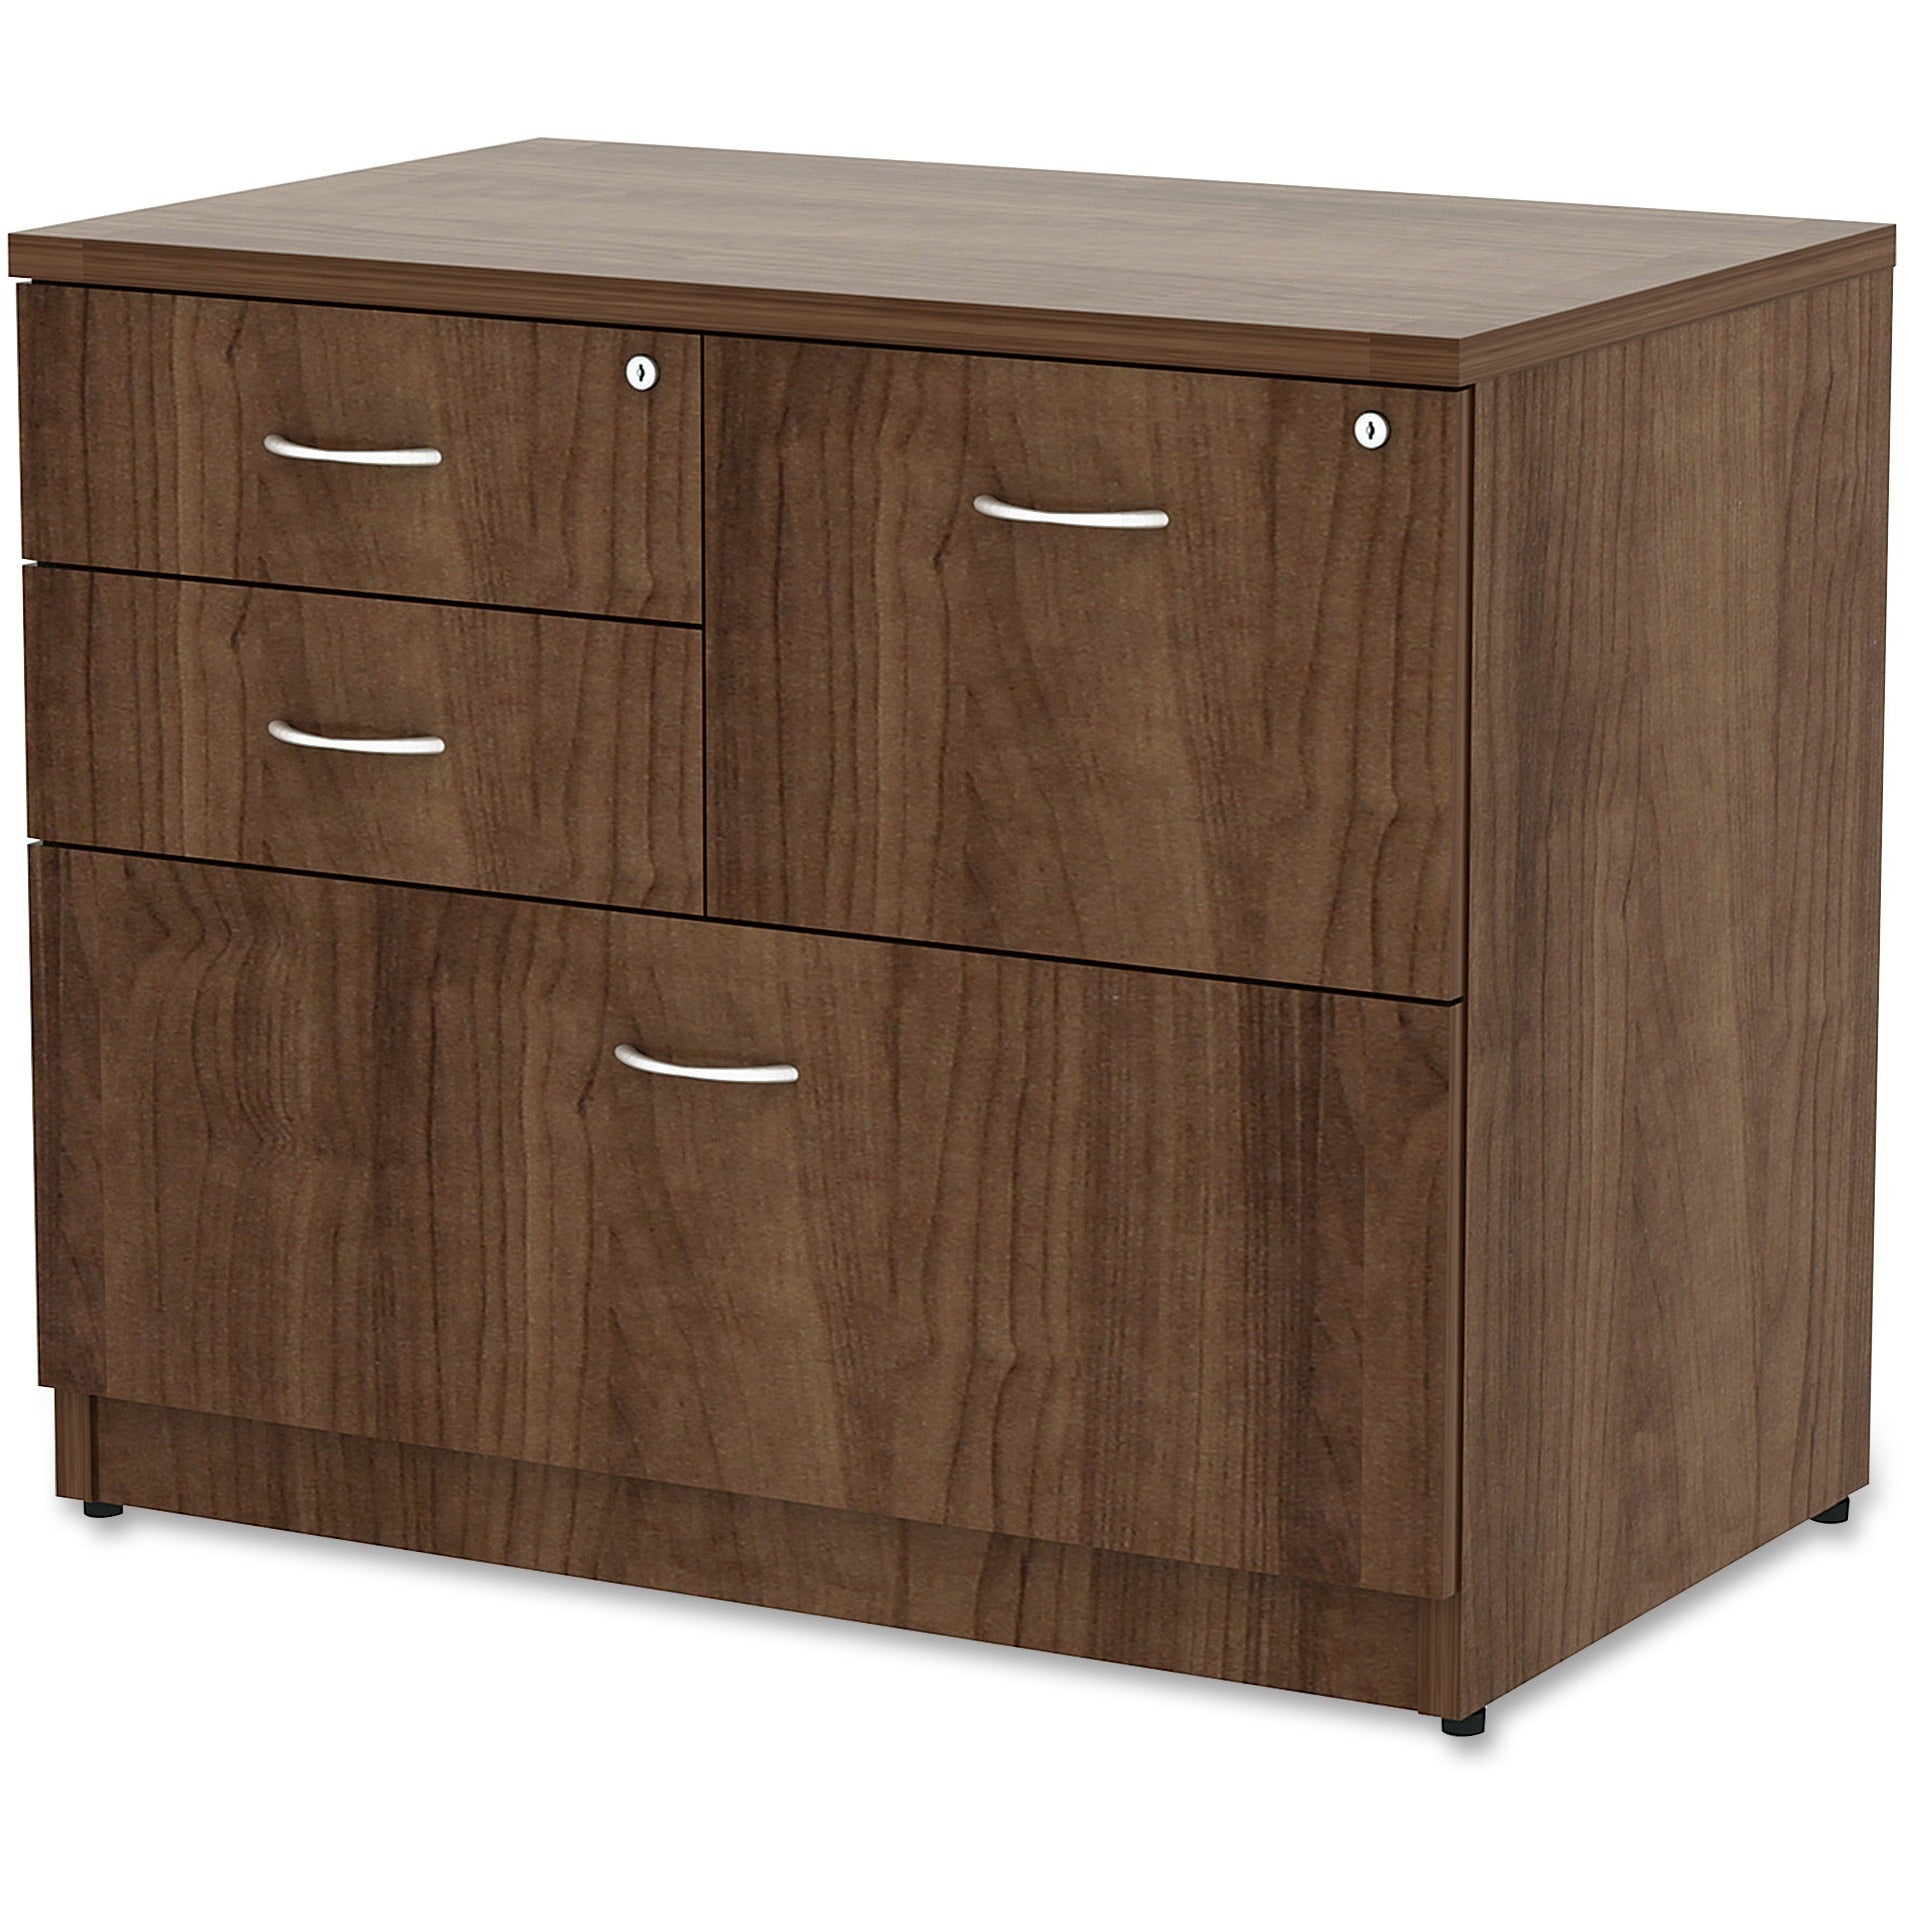 lorell-essentials-series-box-box-file-lateral-file-1-side-panel-01-edge-355-x-22295-lateral-file-4-x-box-file-drawers-walnut-laminate-table-top-versatile-ball-bearing-glide-drawer-extension-security-lock-durable-adjustable-l_llr69542 - 3